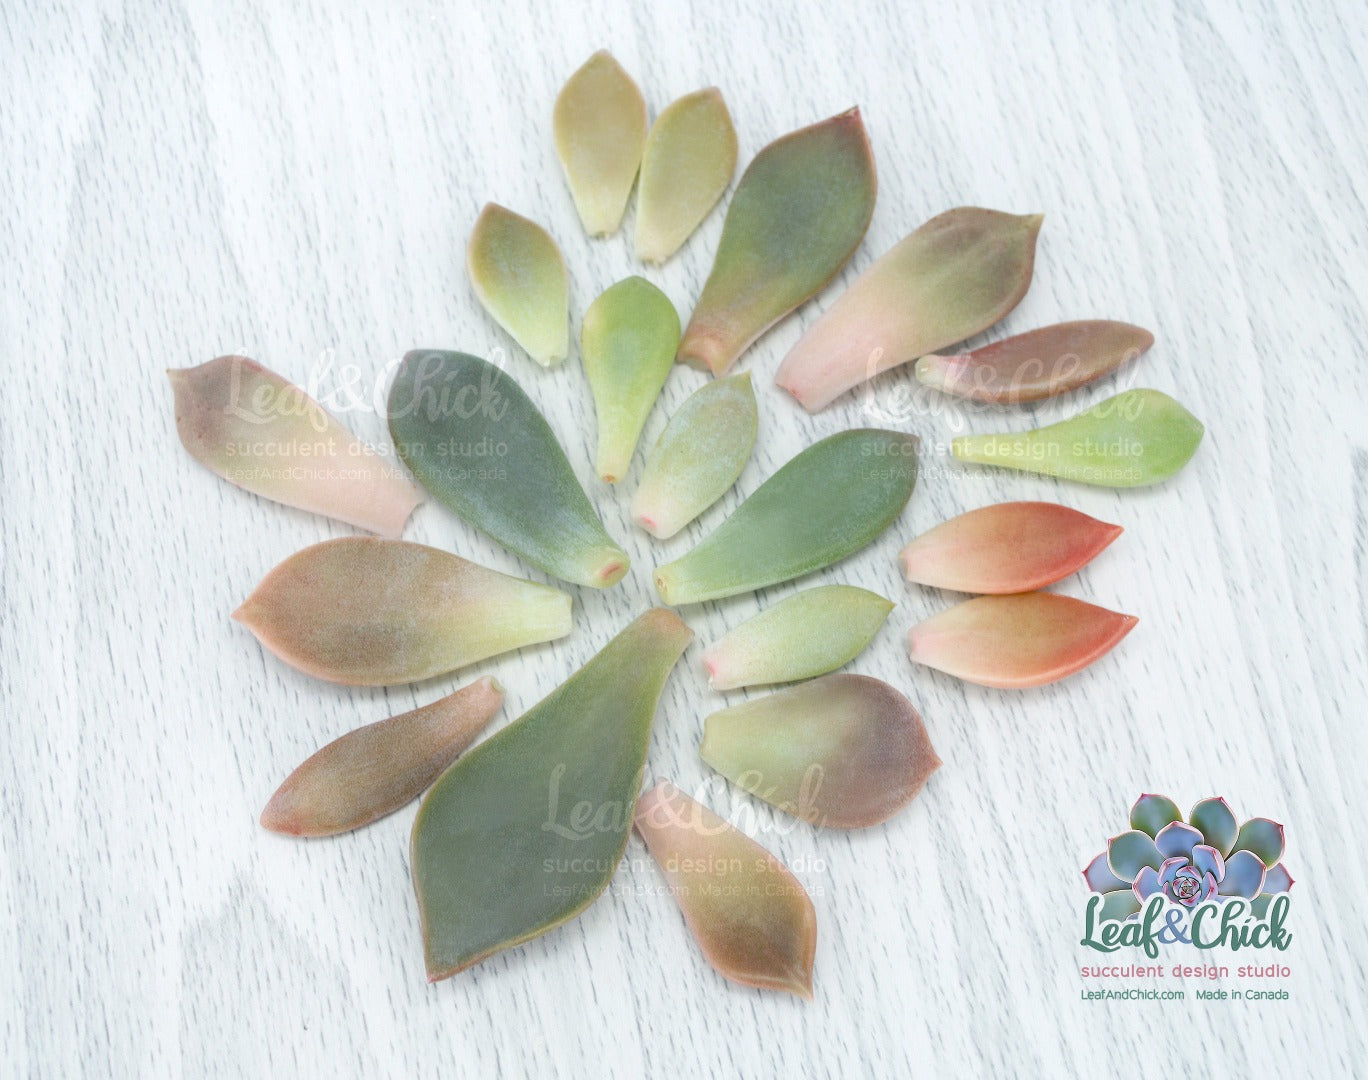 a variety of many types of succulents to grow your collection